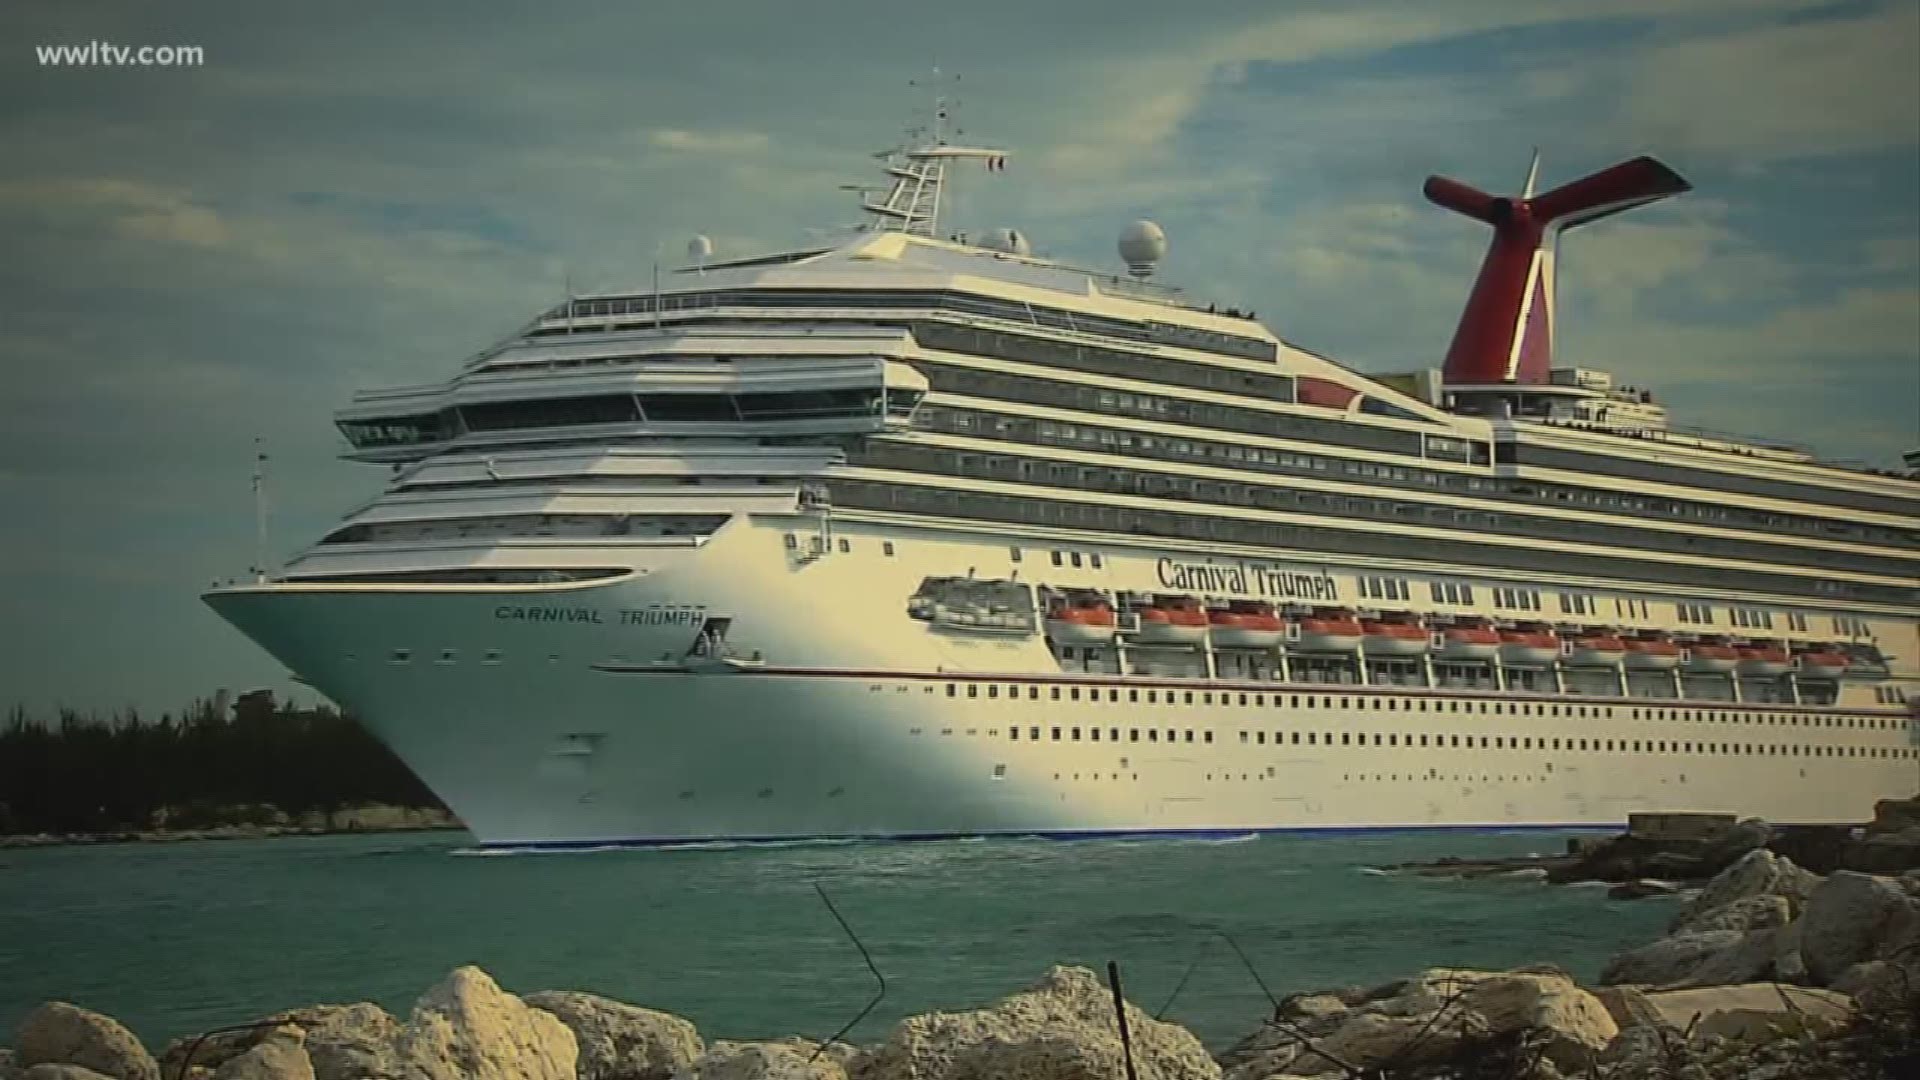 Woman missing after falling overboard of Carnival Triumph